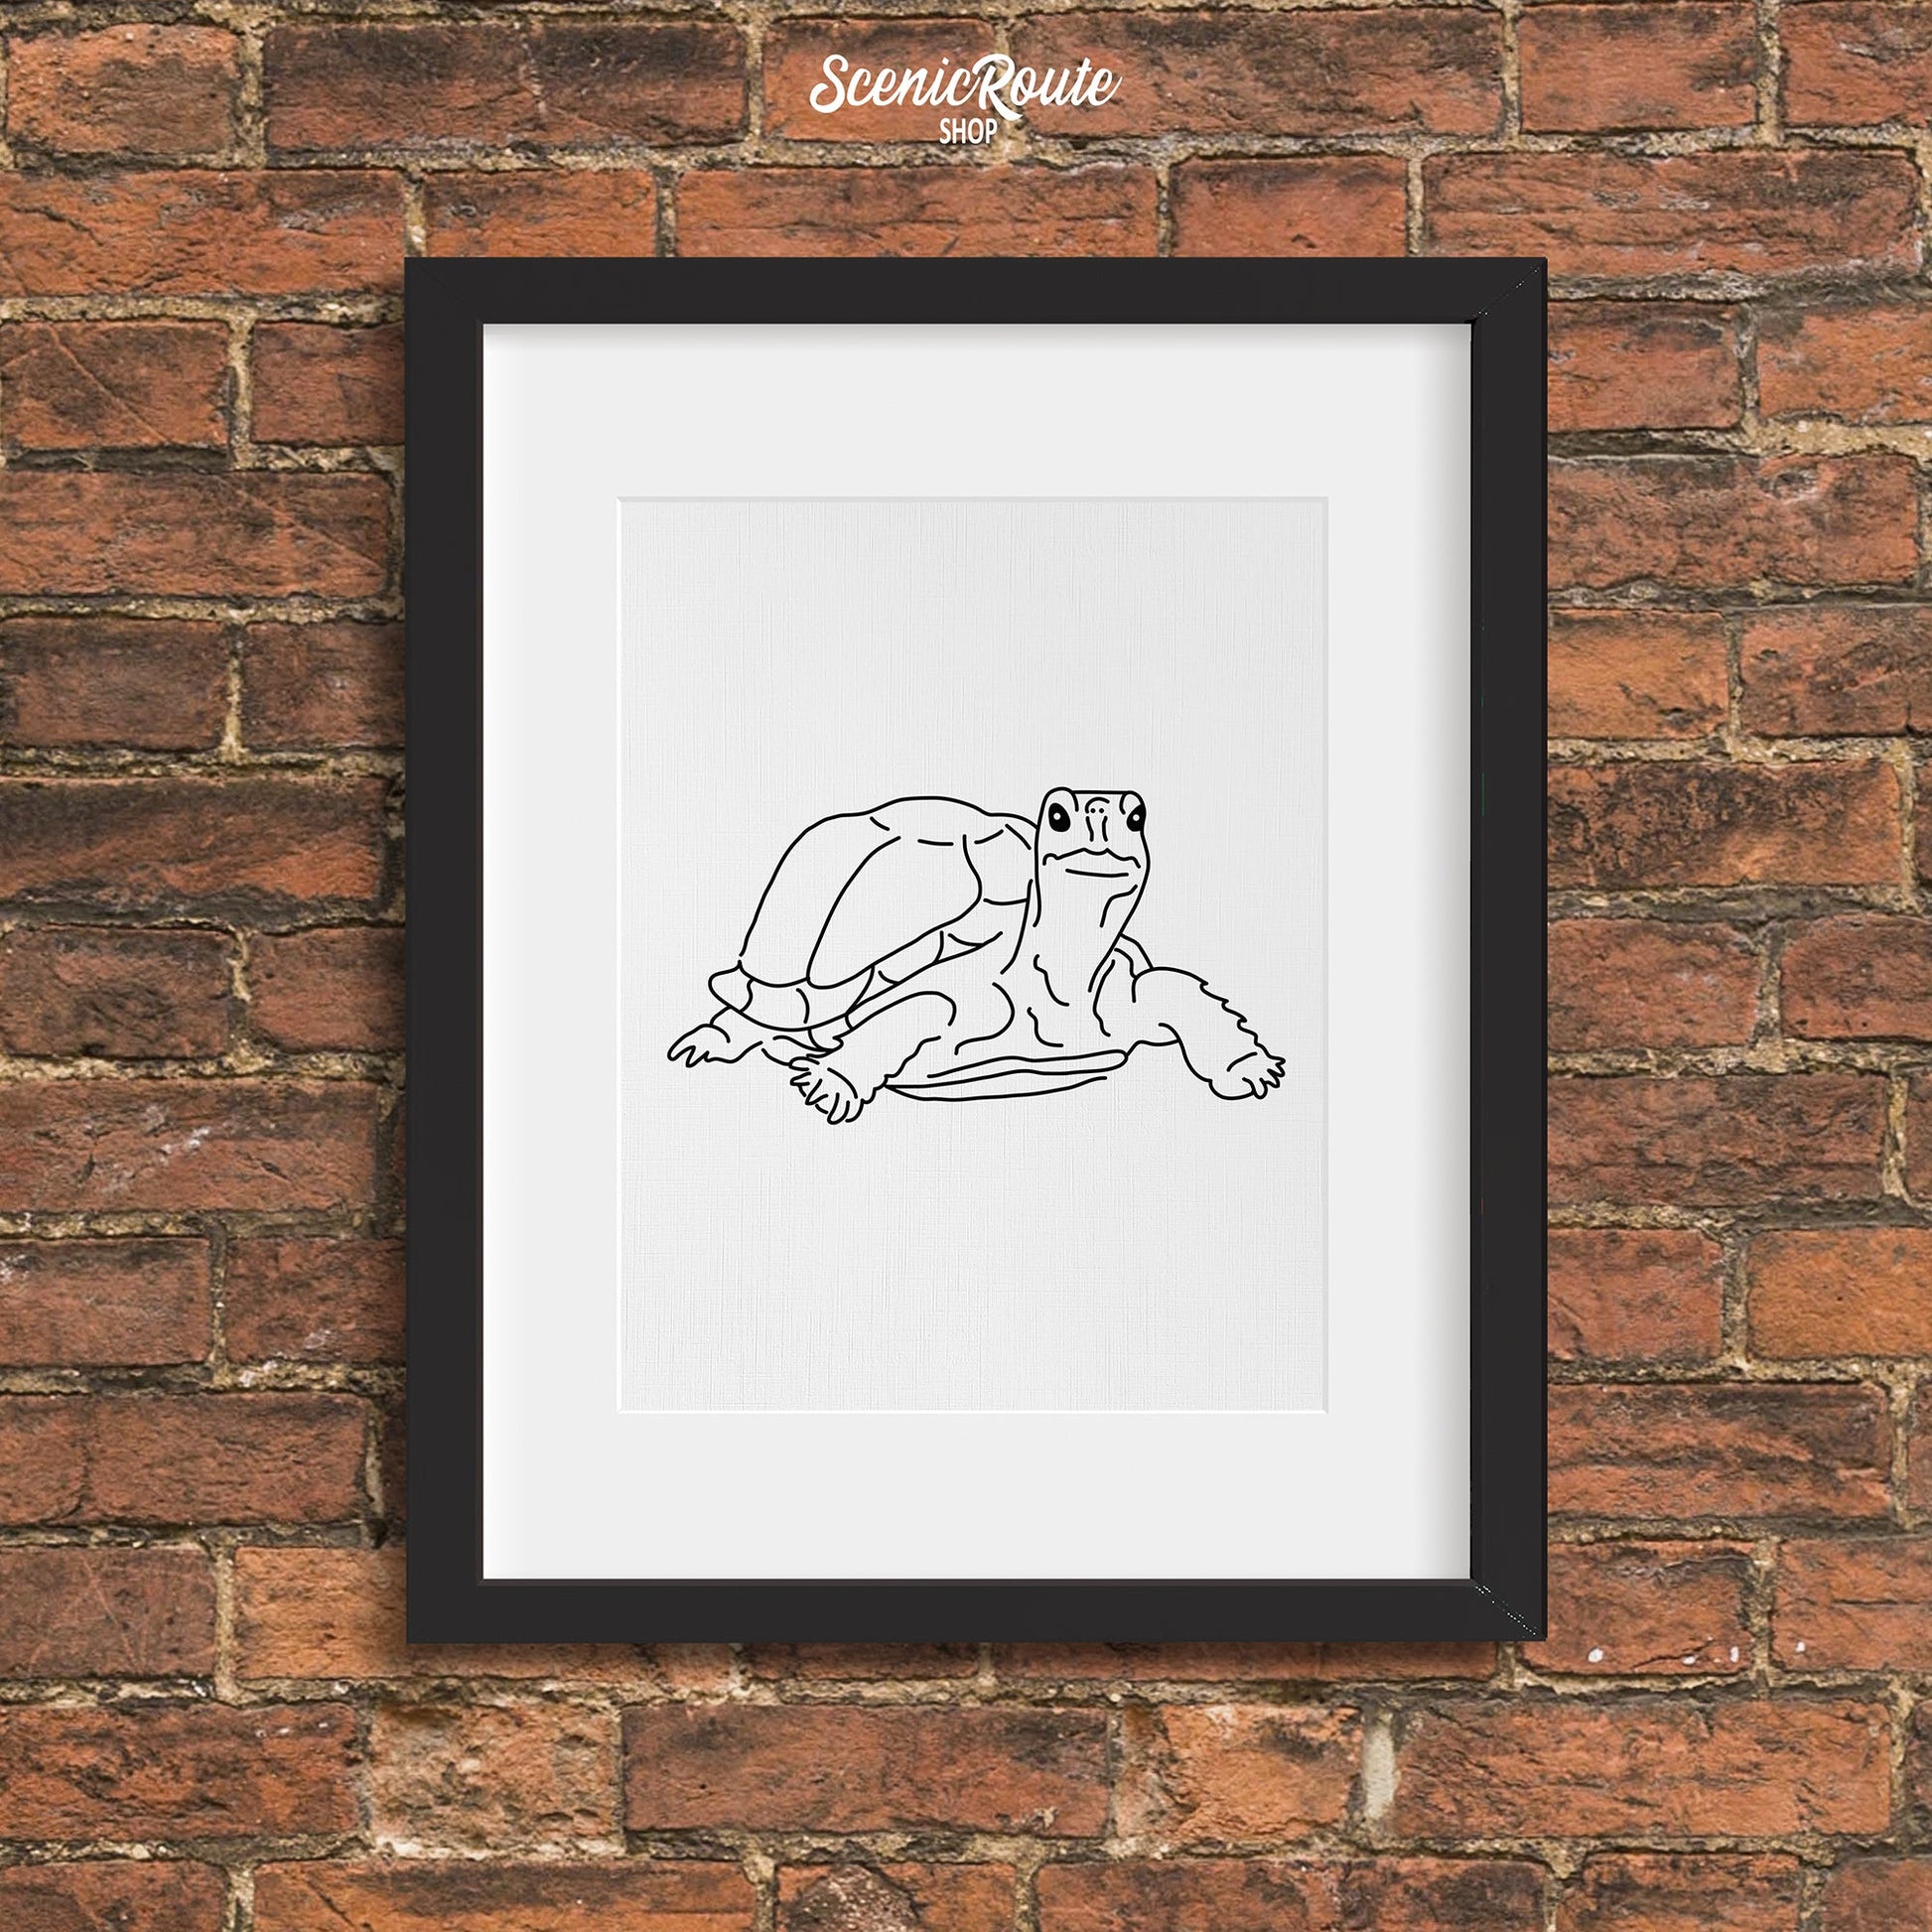 A framed line art drawing of a Tortoise on a brick wall